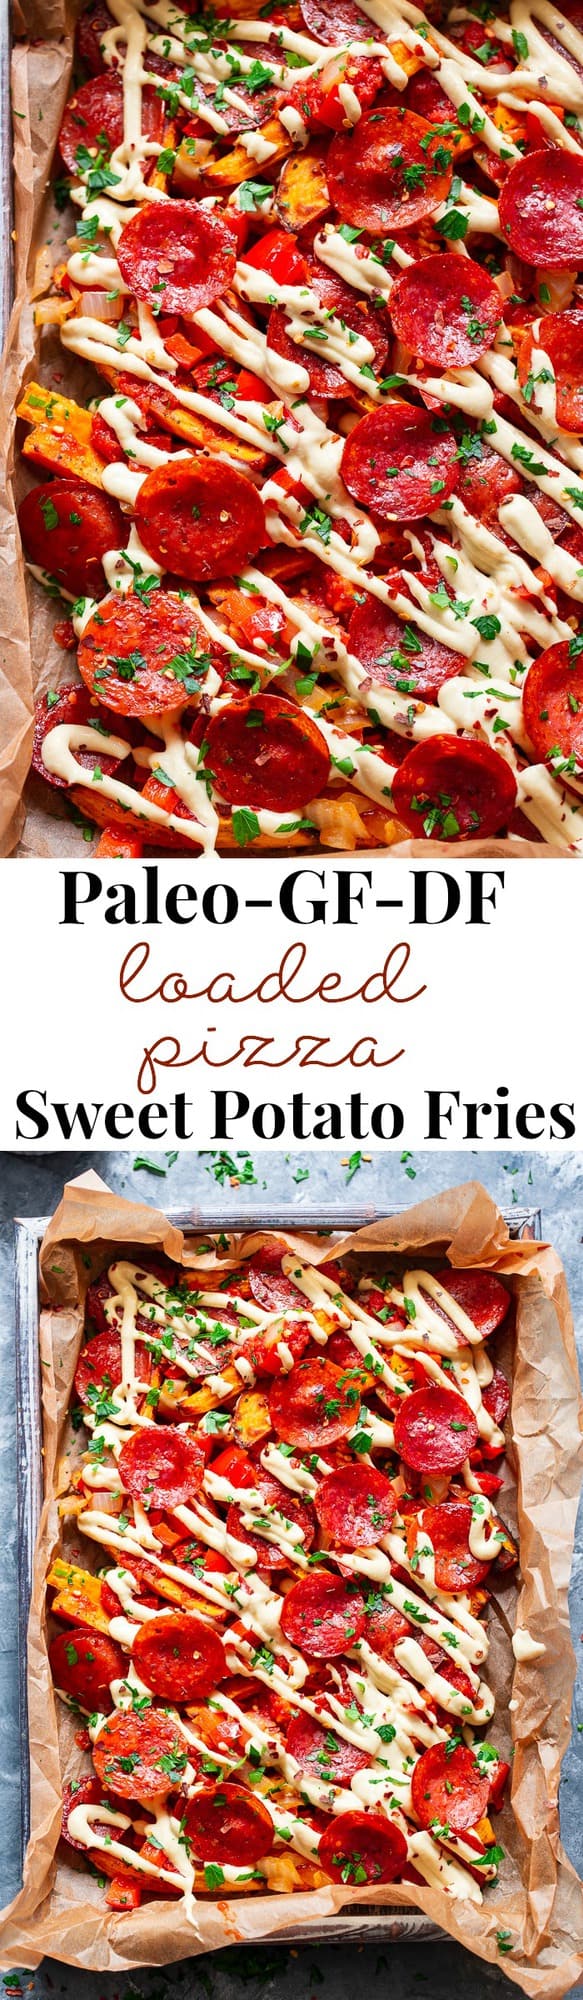 These loaded sweet potato fries have all the toppings to make you feel like you’re eating a pepperoni pizza!  An easy dairy free cheese sauce, marinara, peppers and onions, and zesty pepperoni make this a fun meal that’s just as healthy as it is delicious!  Paleo, gluten-free, dairy-free, family friendly.